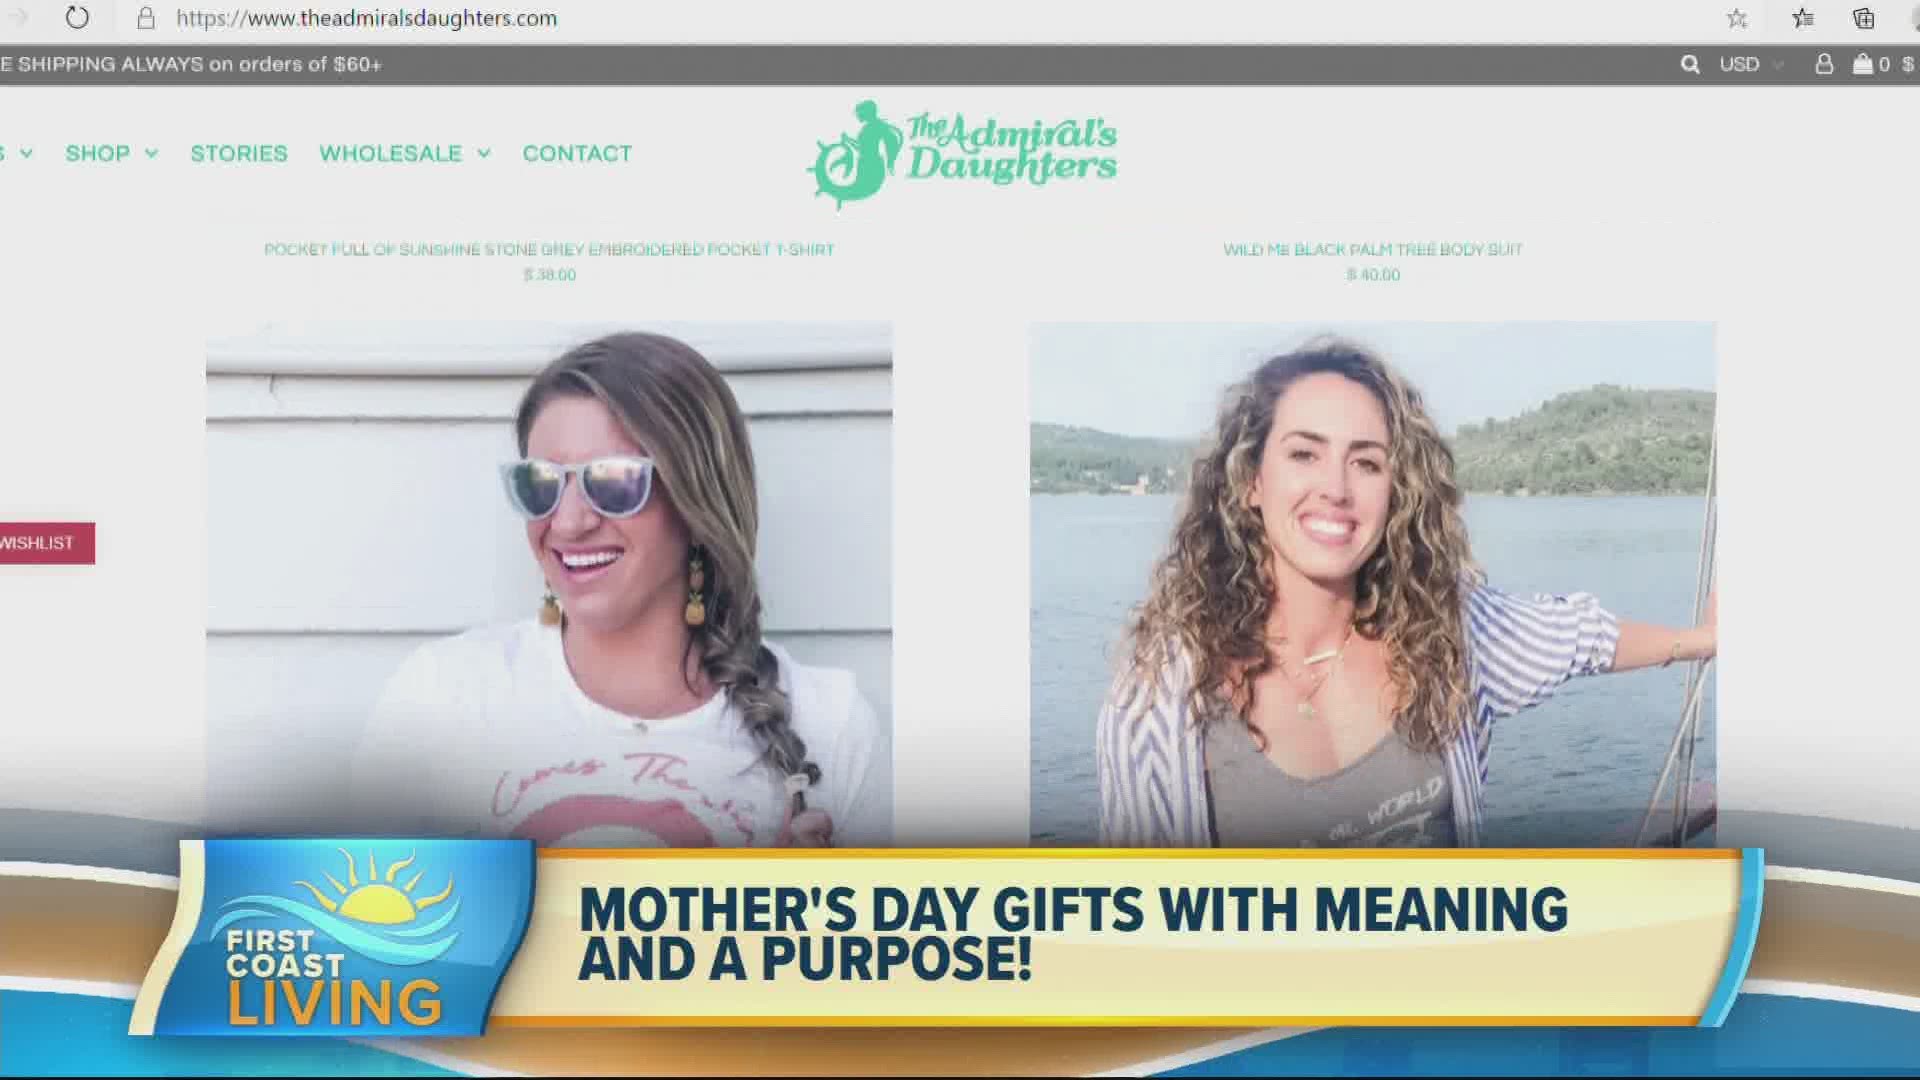 Give a gift to mom that gives back to many!